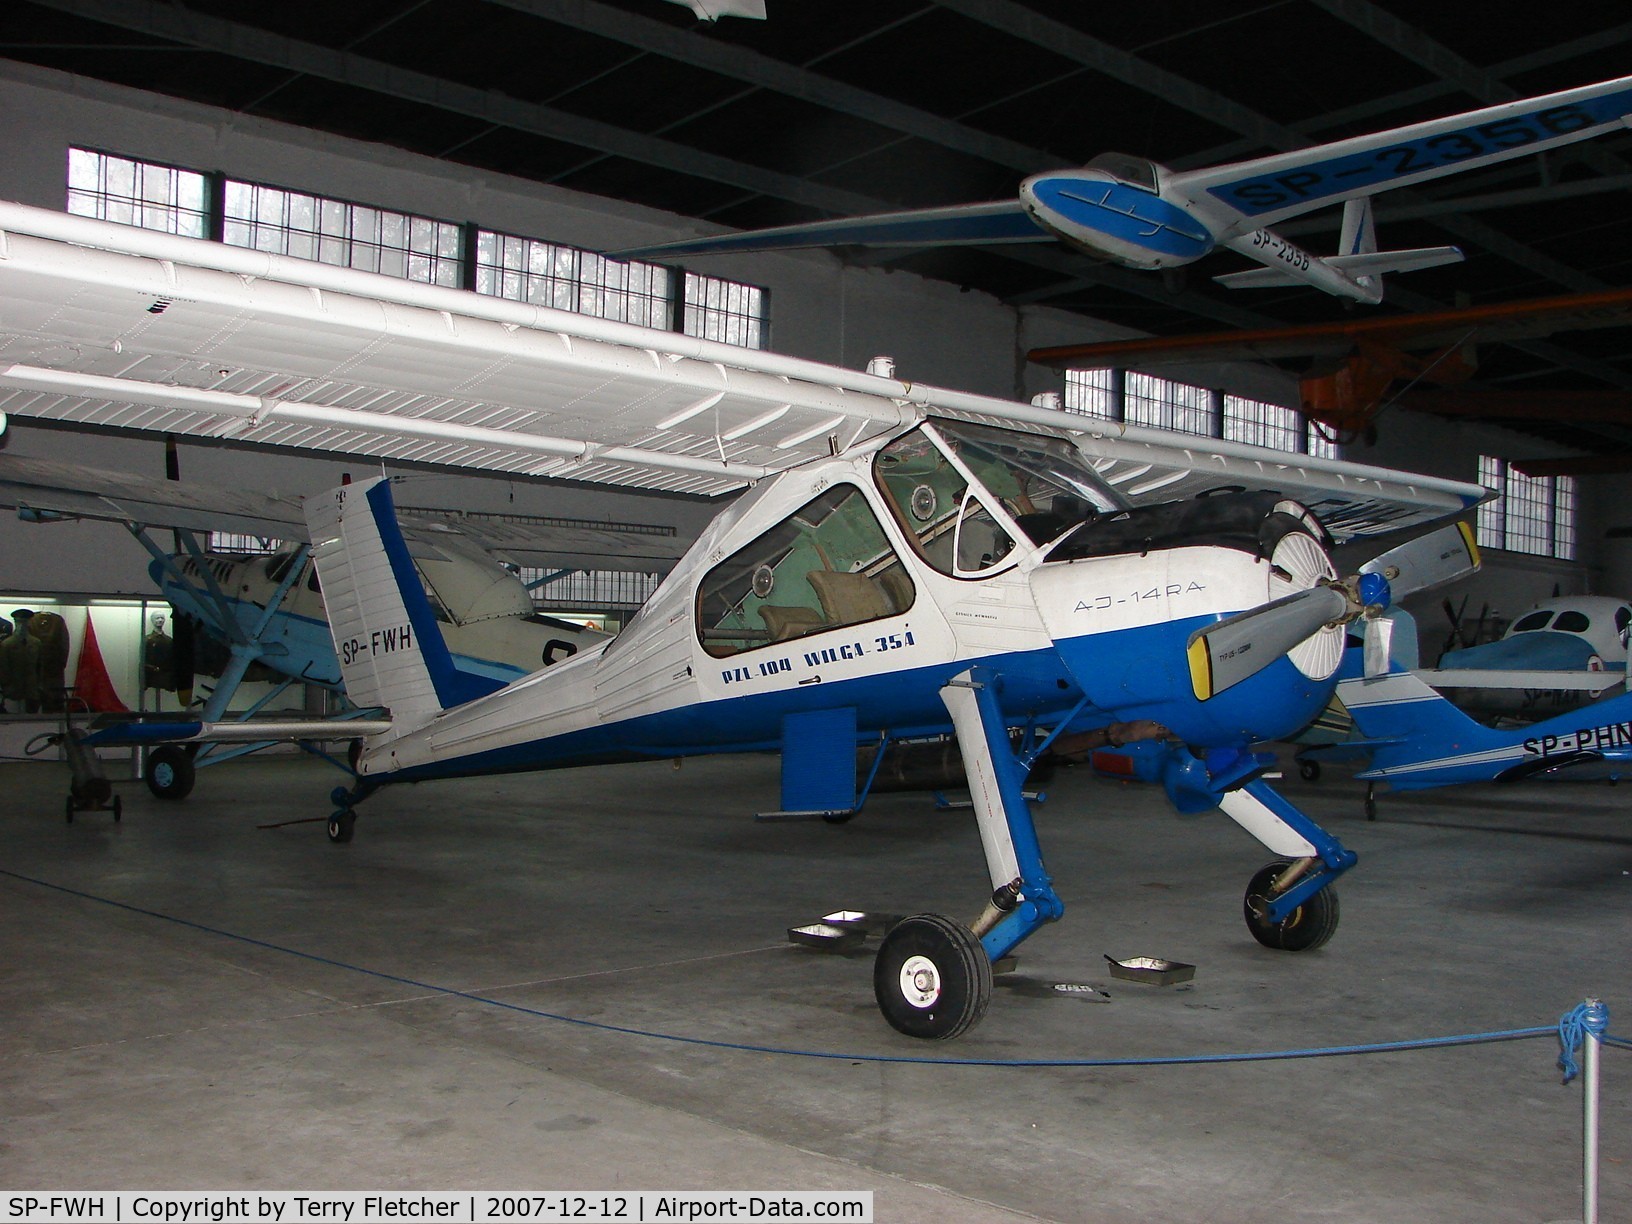 SP-FWH, PZL-Okecie PZL-104 Wilga-35A C/N 20890887, The PZL 104 Wilga 35A has been in continuous polish production as a sports aviation aircraft since 1968 - this example is now preserved at the Poland Aviation Museum in Krakow